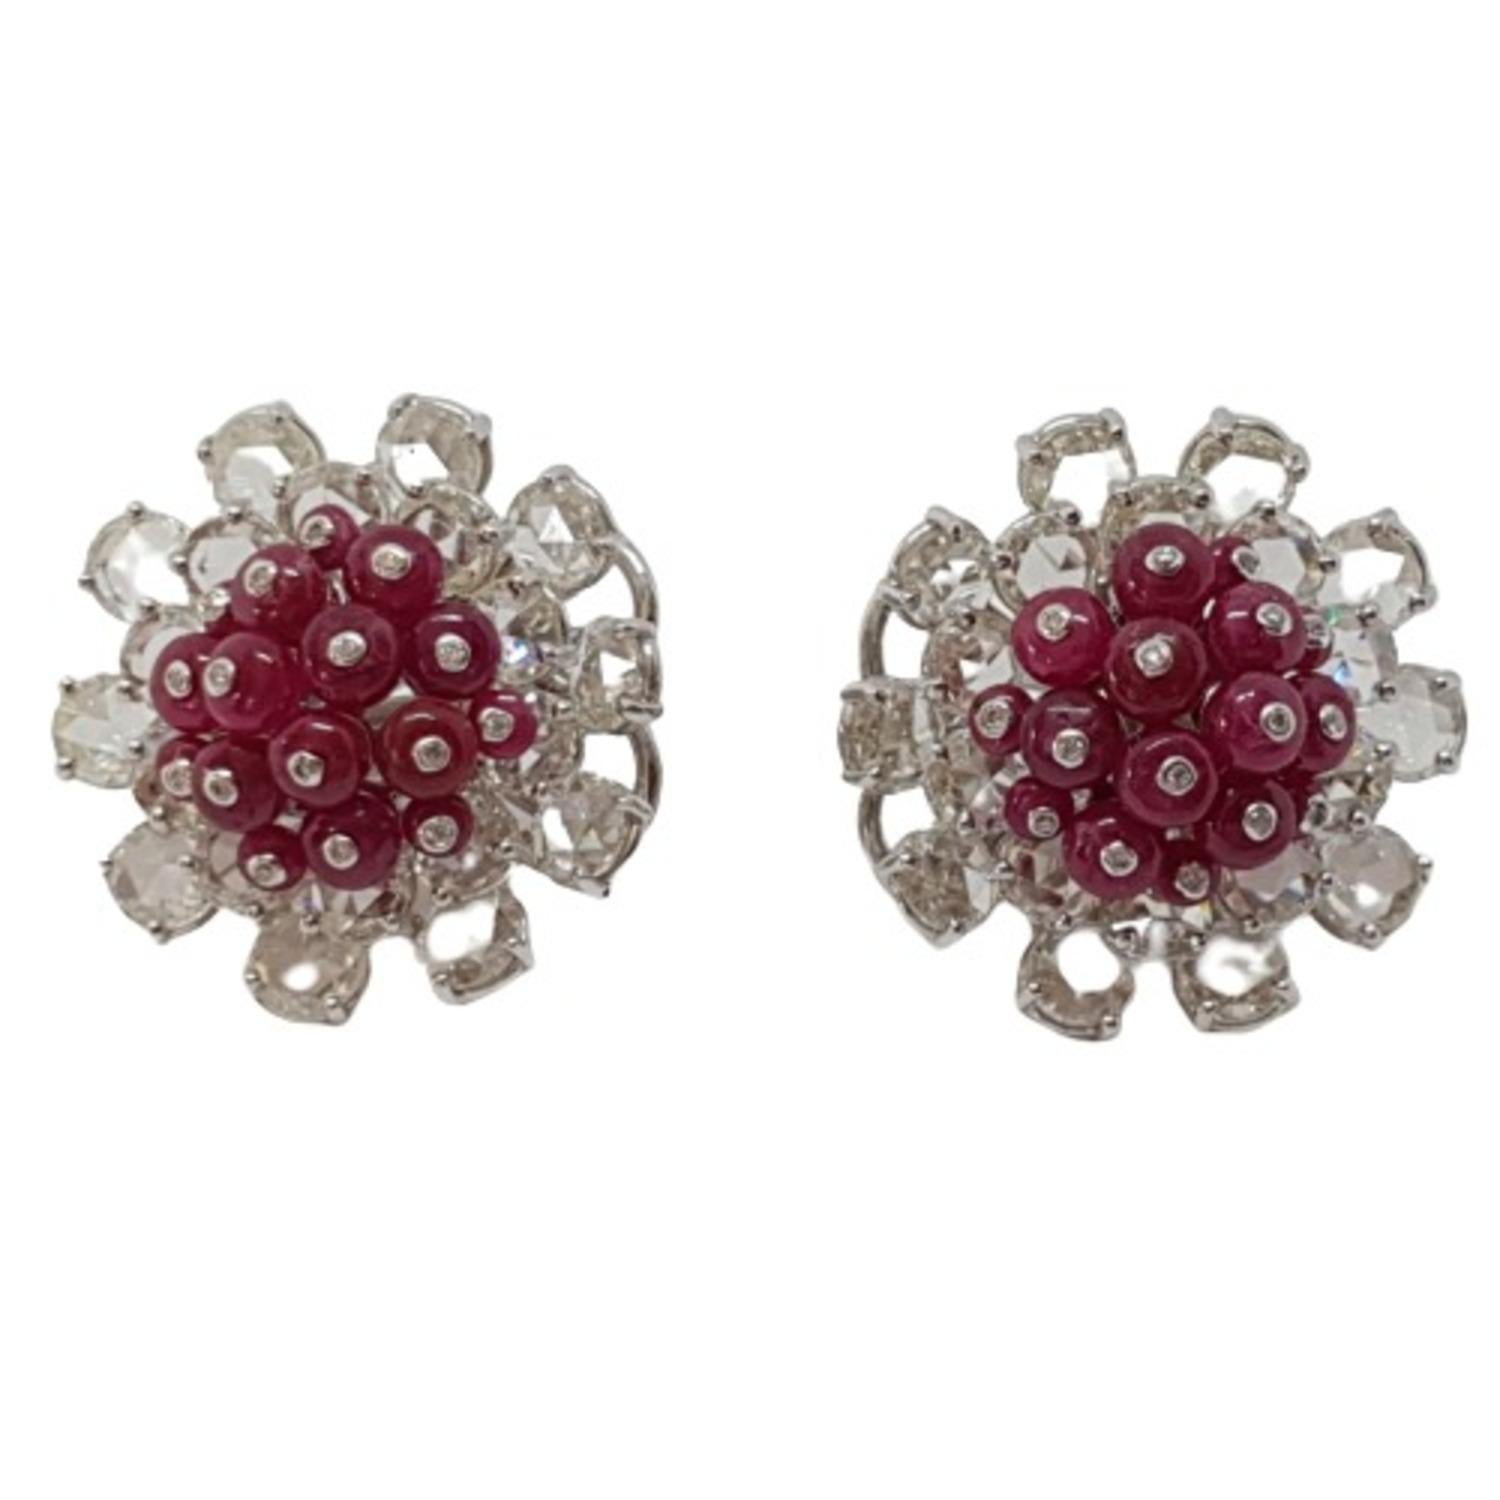 Prong set round rose cuts are placed in layers & the natural Burmese ruby beads form a dome to give these earrings a definition. These modern ear studs are crafted with minimum metal & the setting of the rose cuts is done in a way that the